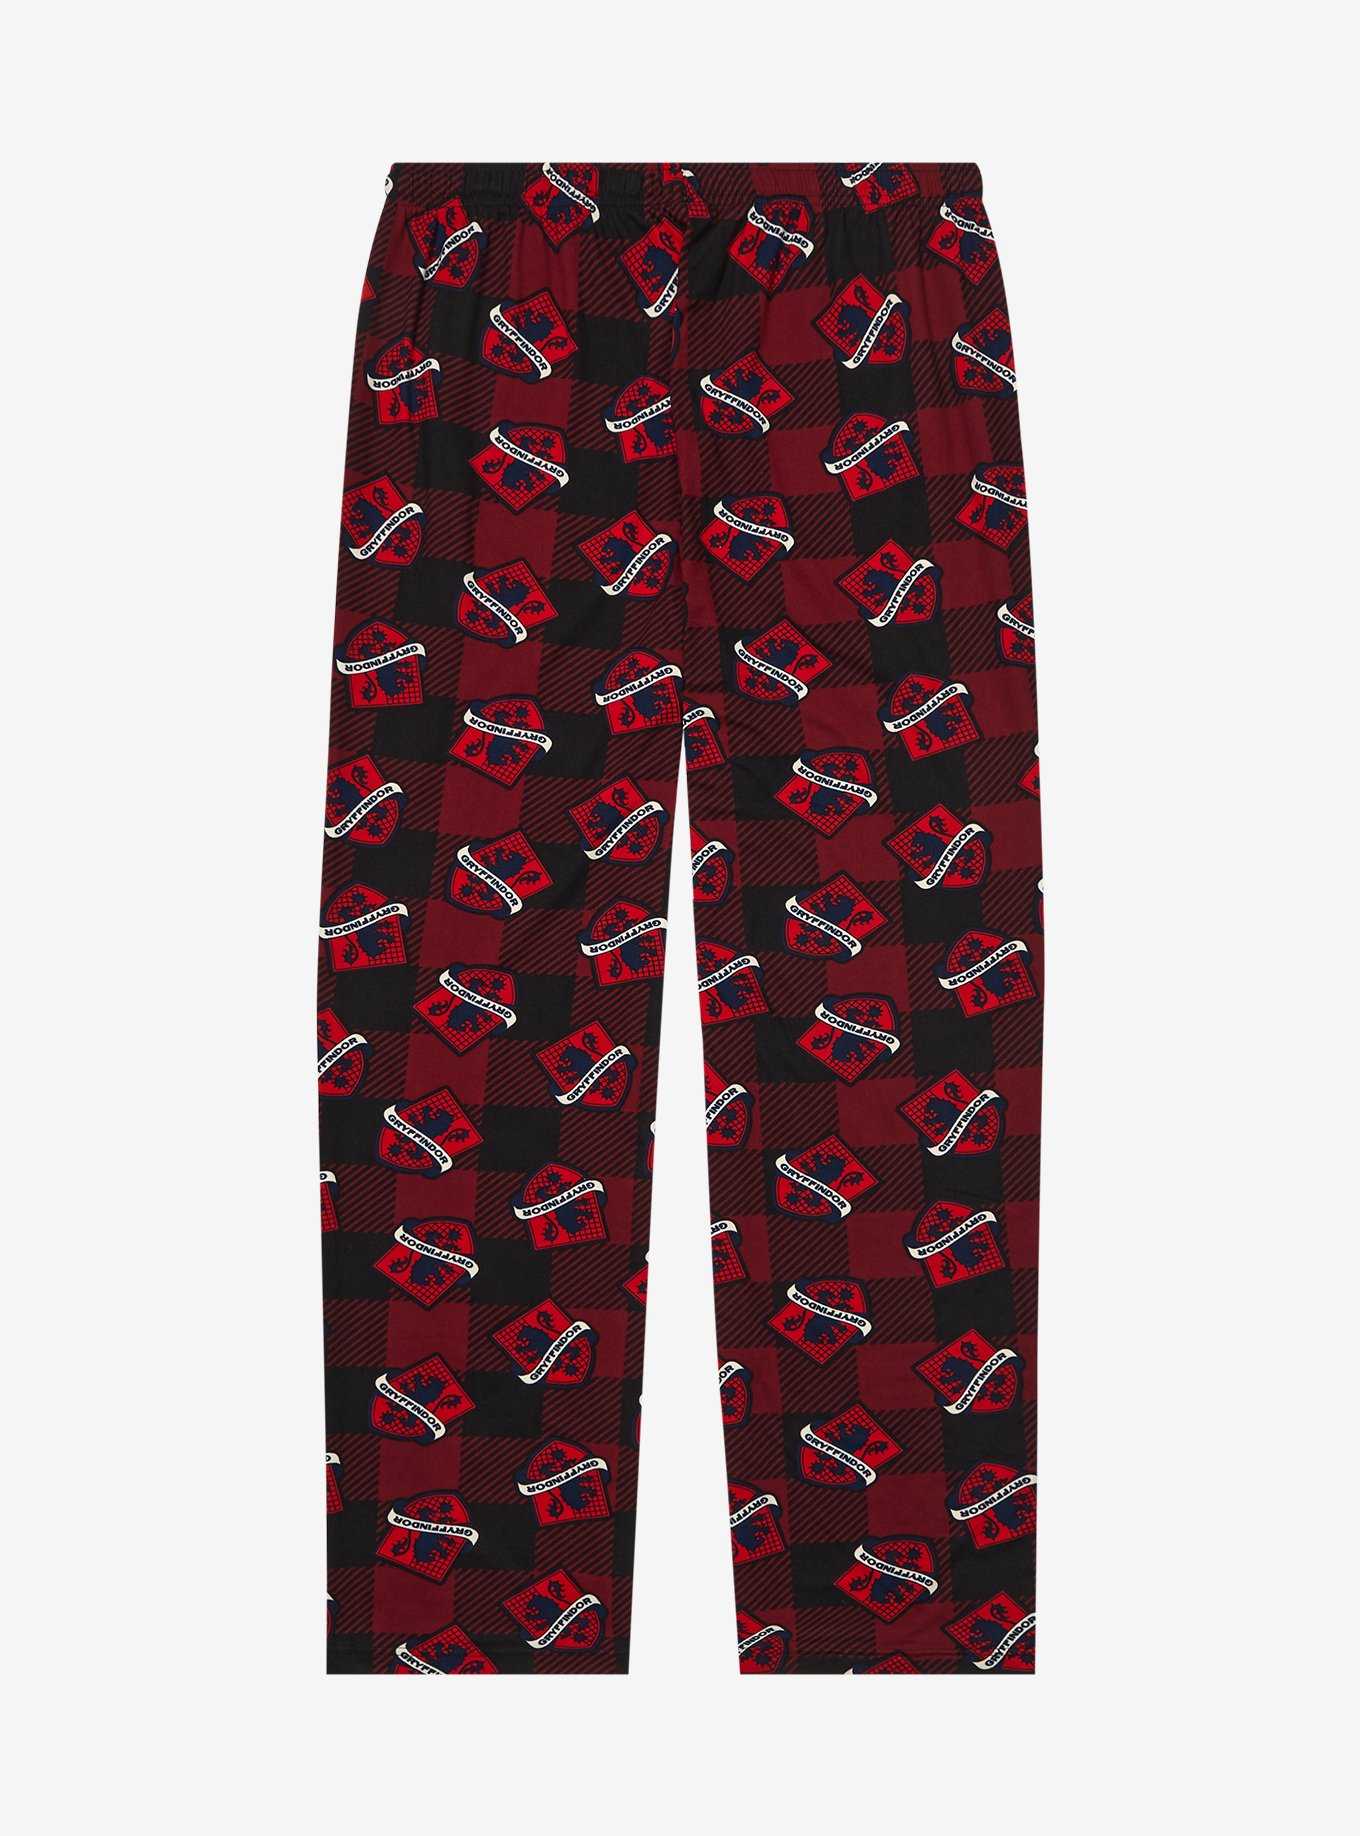 Harry Potter Plaid Gryffindor Allover Print Sleep Pants - BoxLunch Exclusive, , hi-res